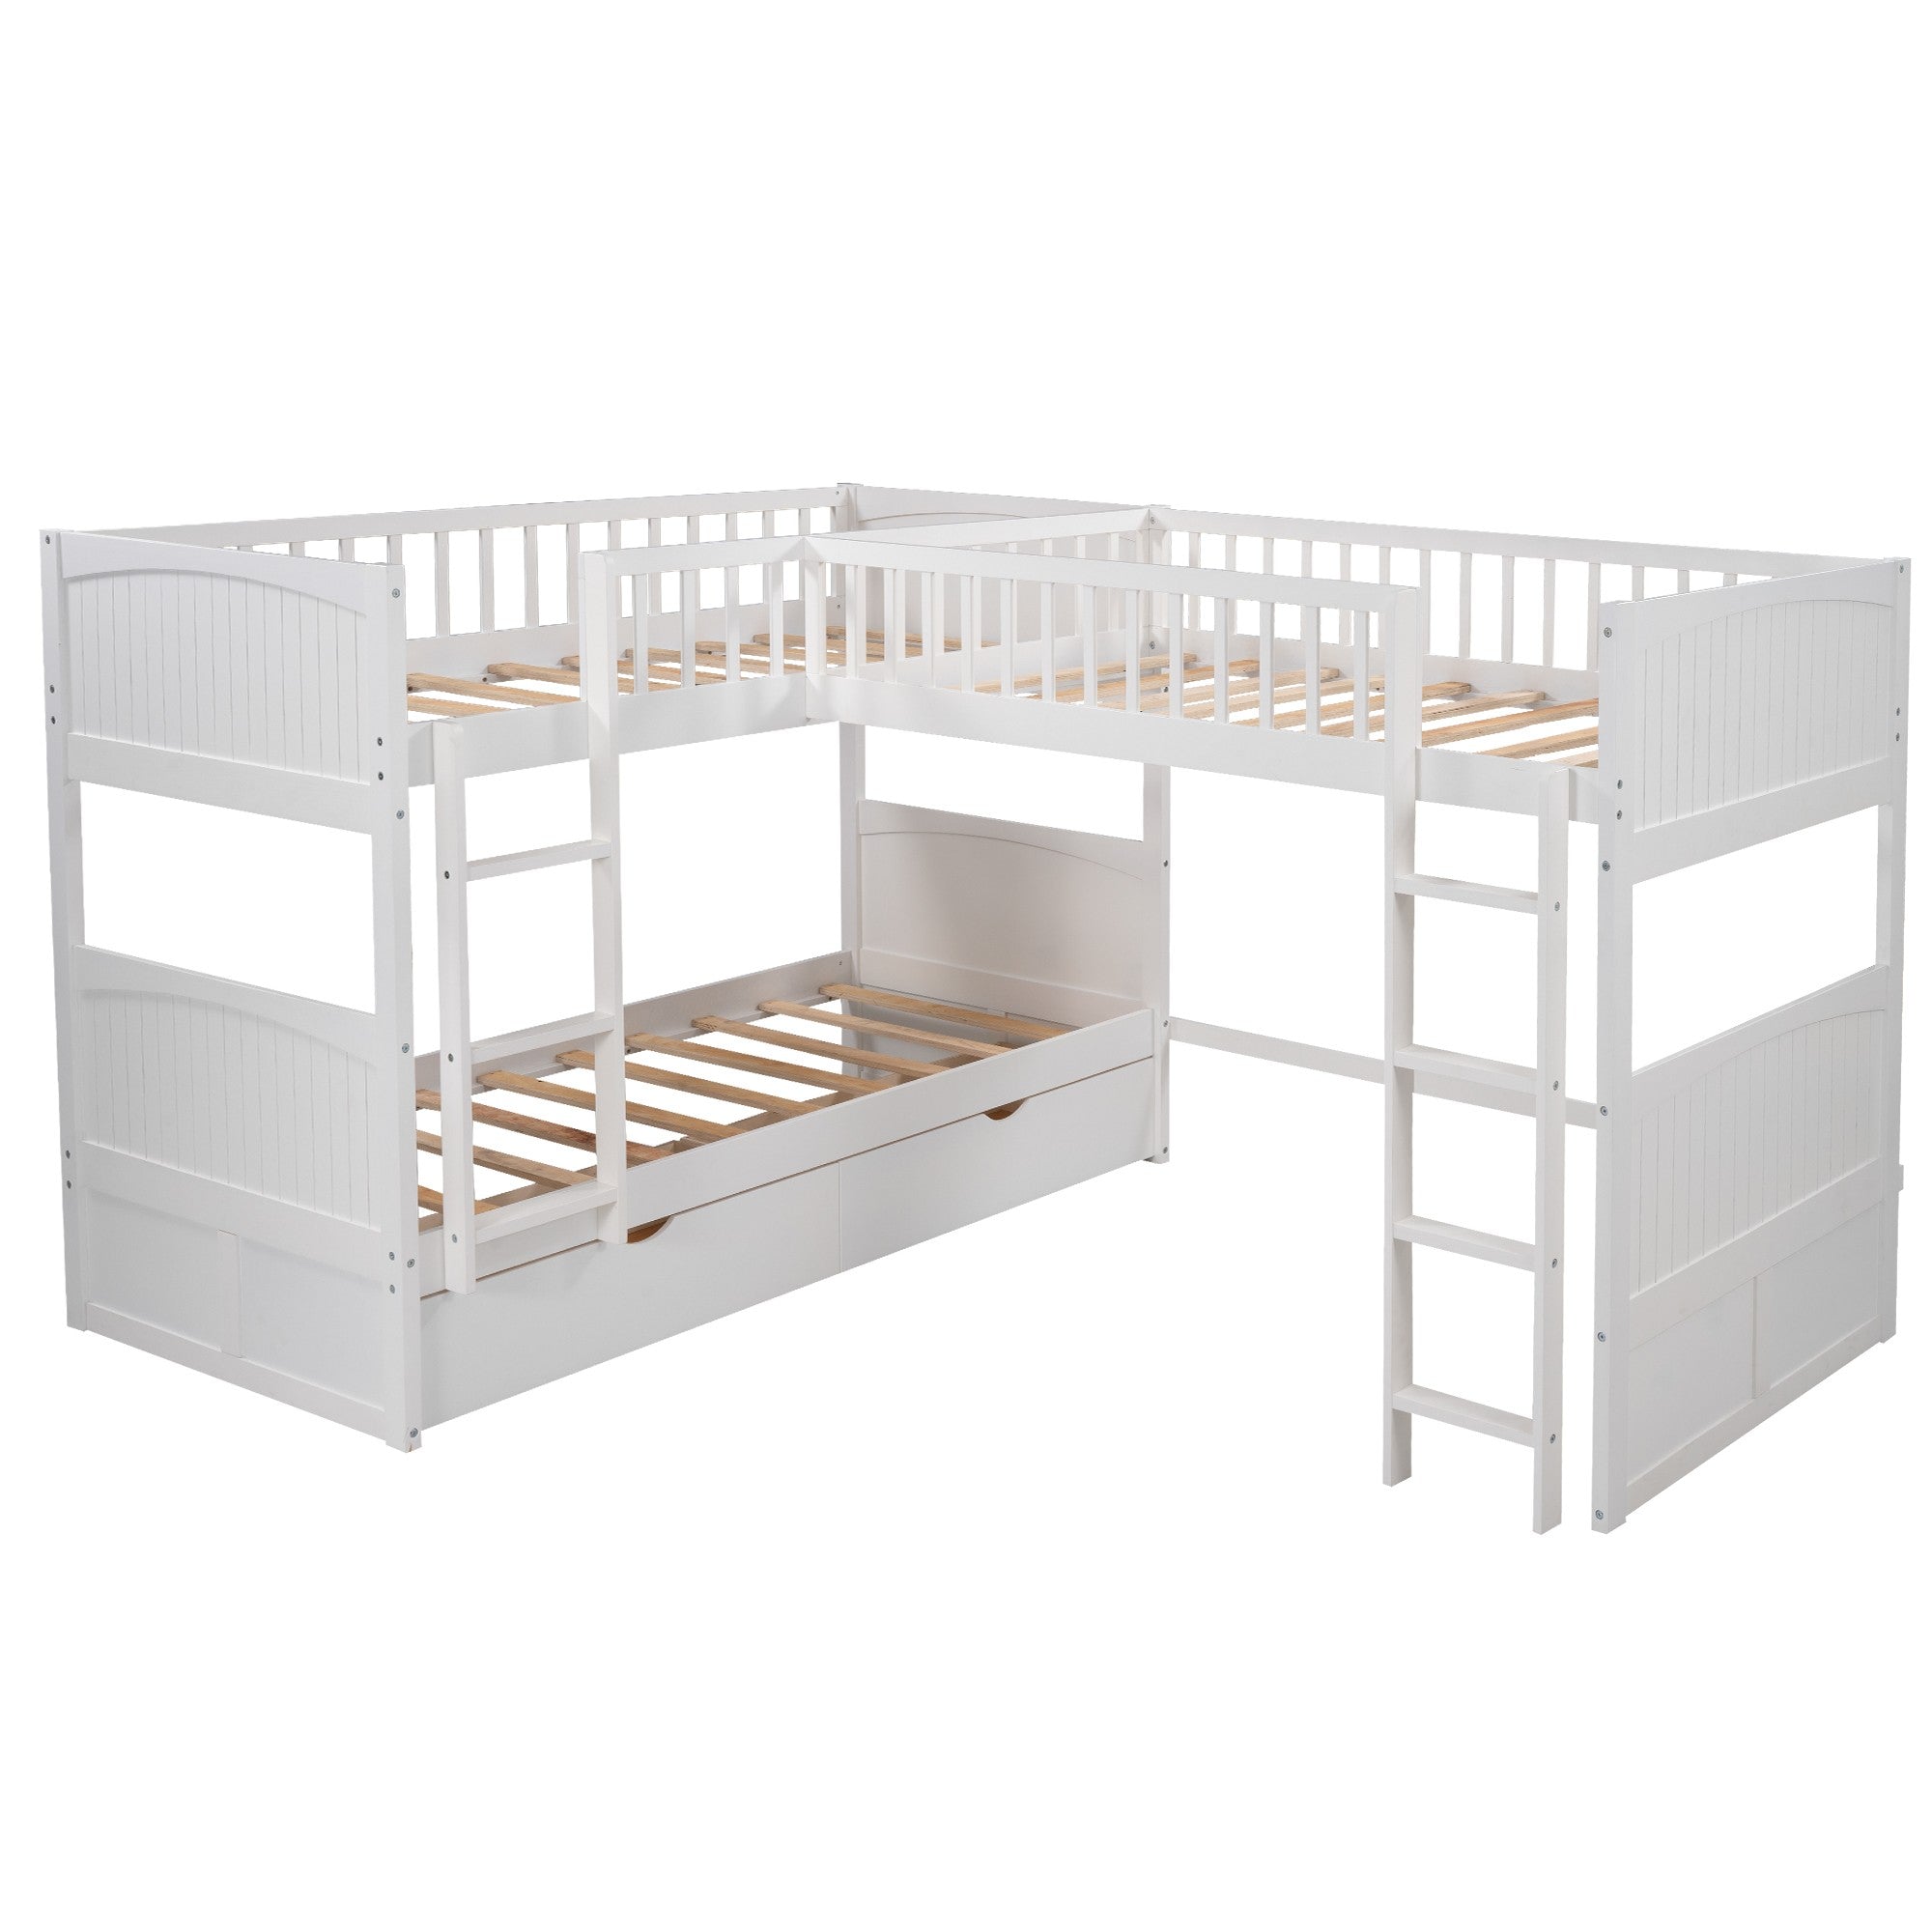 White Twin Size Bunk Bed with attached Loft Bed and Drawers